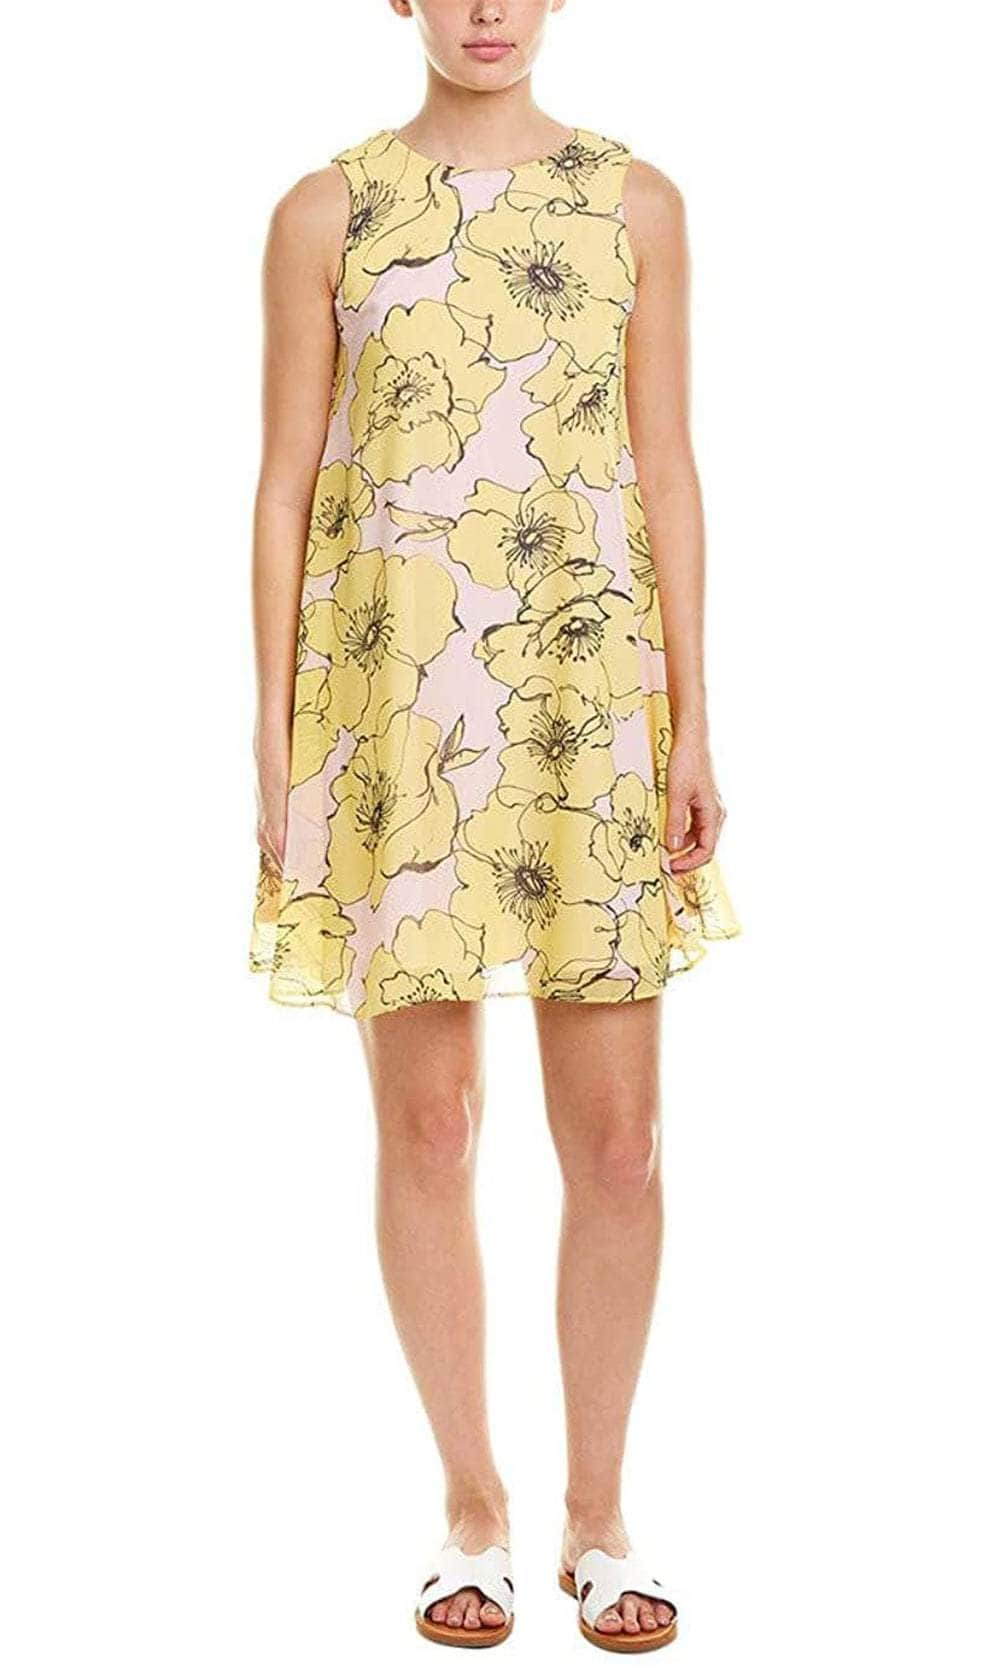 Image of Taylor 1447M - Floral Sleeveless Stretch Fabric Short Dress